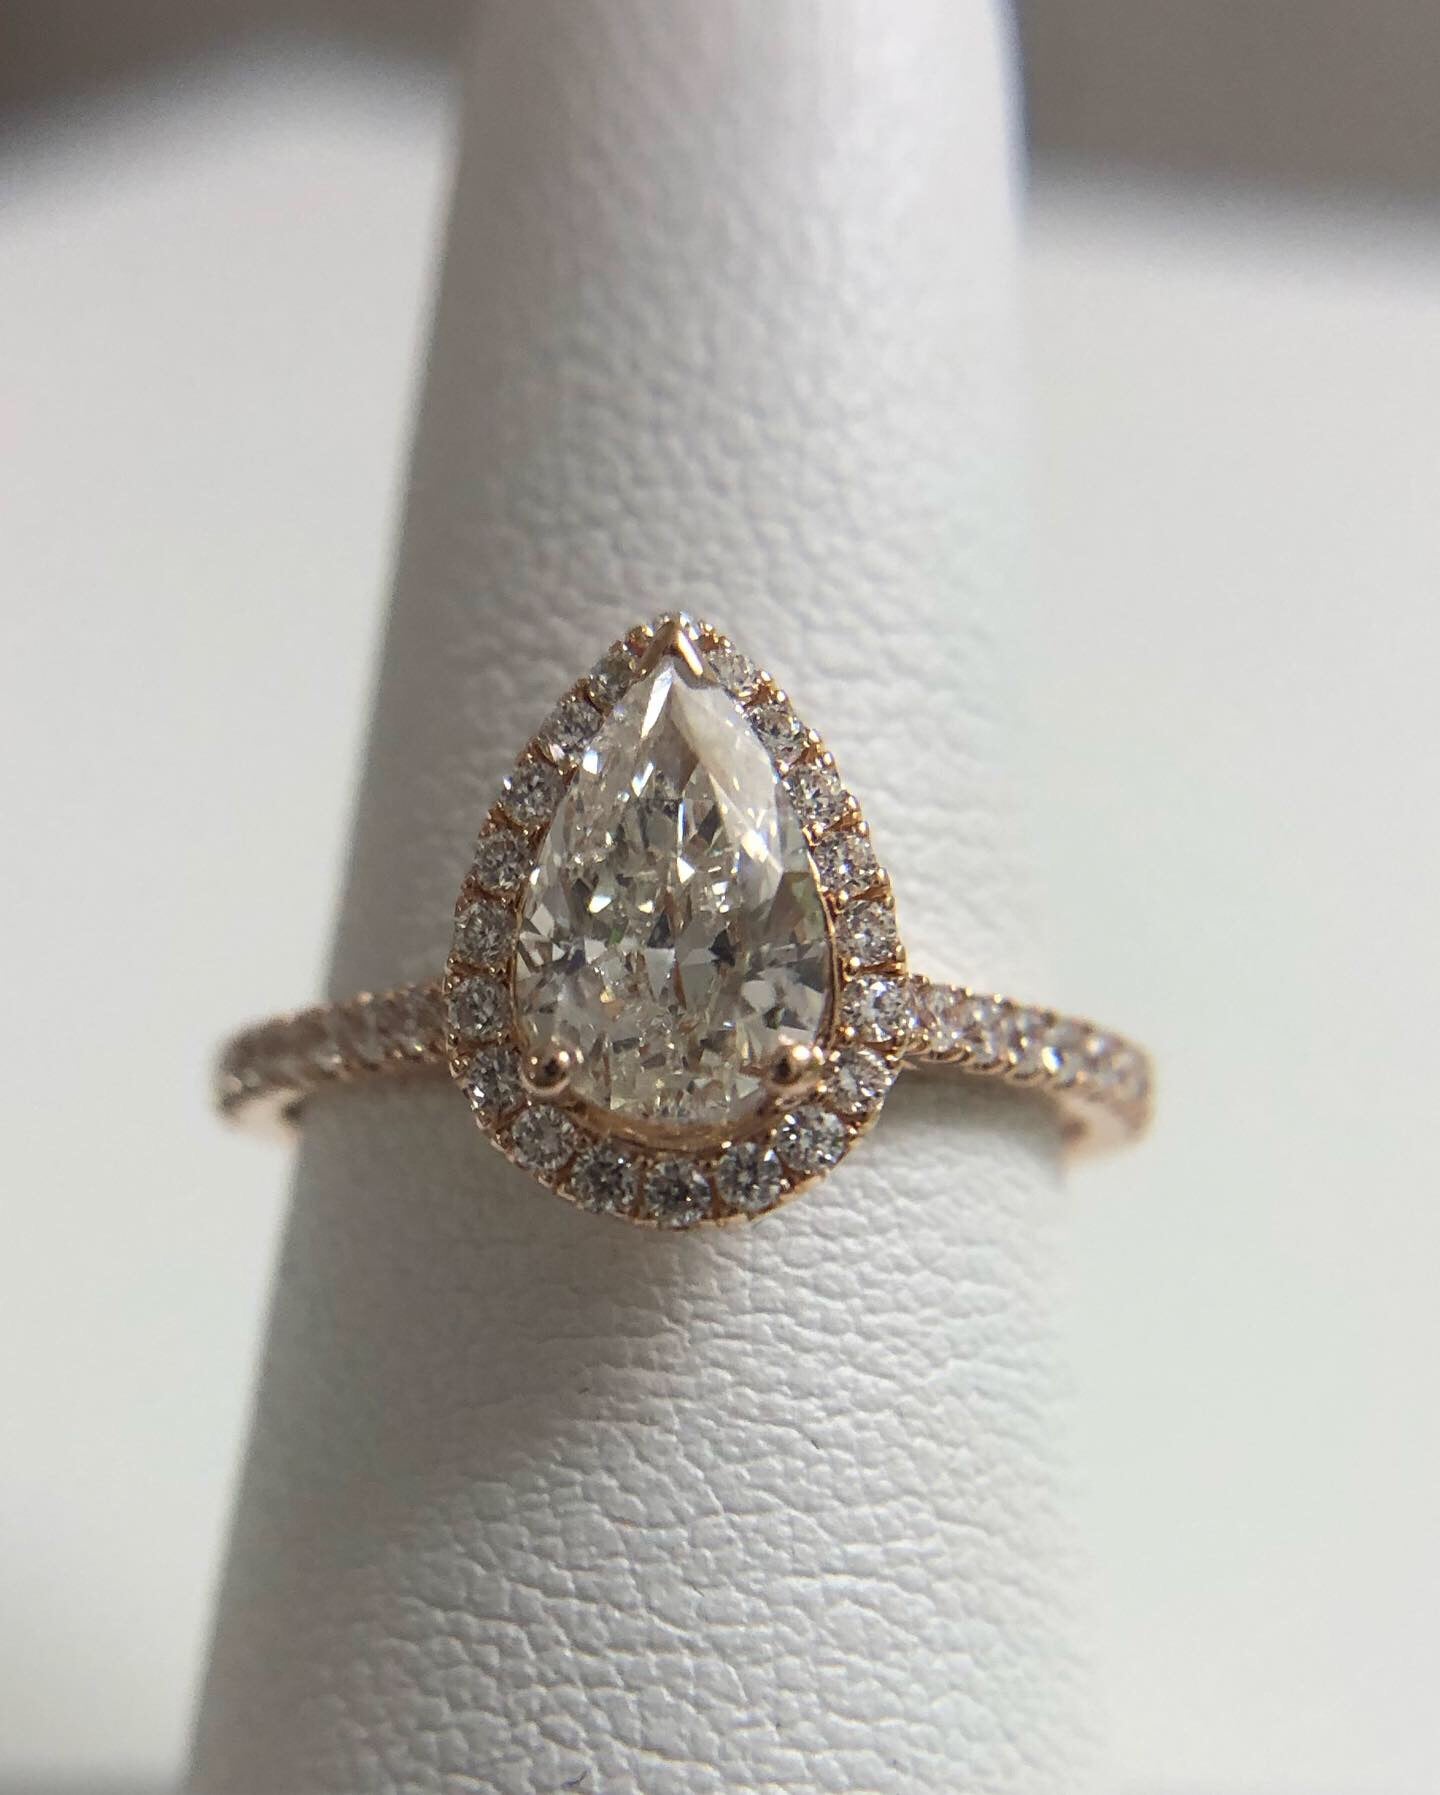 Elegant engagement ring made with 1ct pear brilliant in the center, SI3 clarity and G color, ring is made in size 7 and can be adjusted, the metal is 14KT rose gold. The small round diamonds are totalling 0.40ct and are SI clarity and G color. Ring